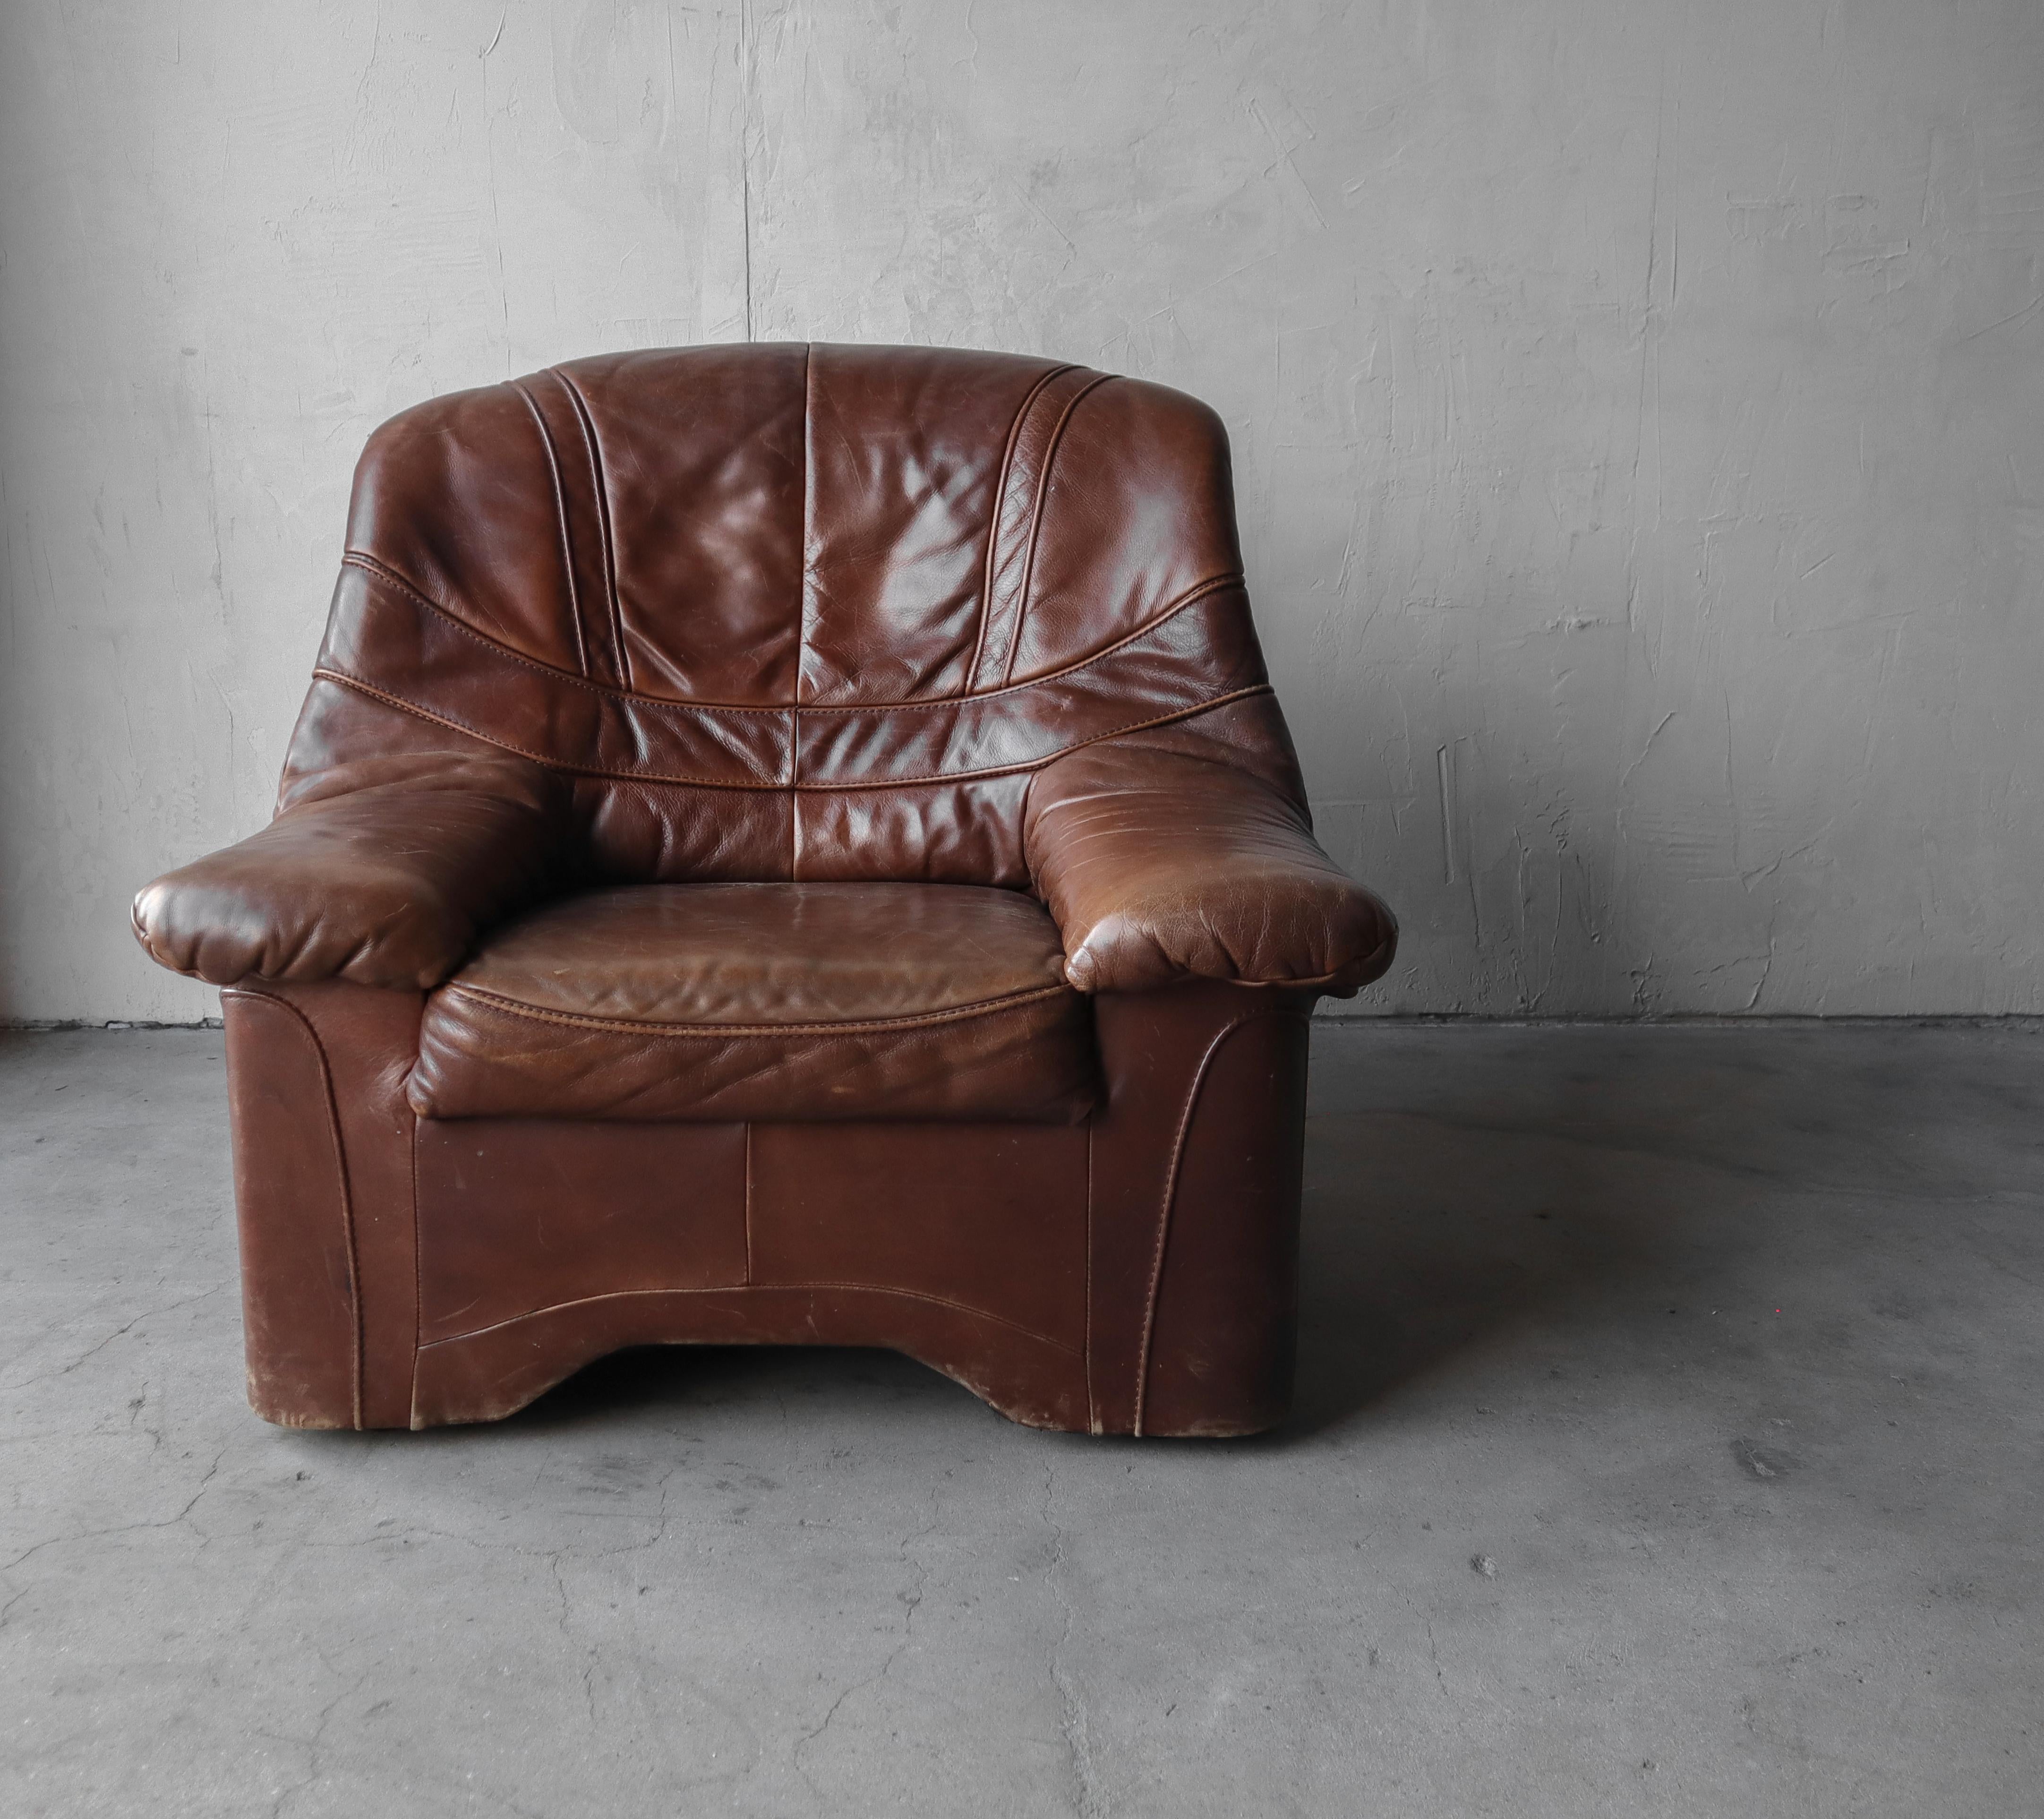 Postmodern Brazilian leather lounge chair. The chair is large and comfortable, perfect for a mancave.

The chair is comfortable and structurally sound. The leather is in great condition overall with some character adding patina.
  
    

  